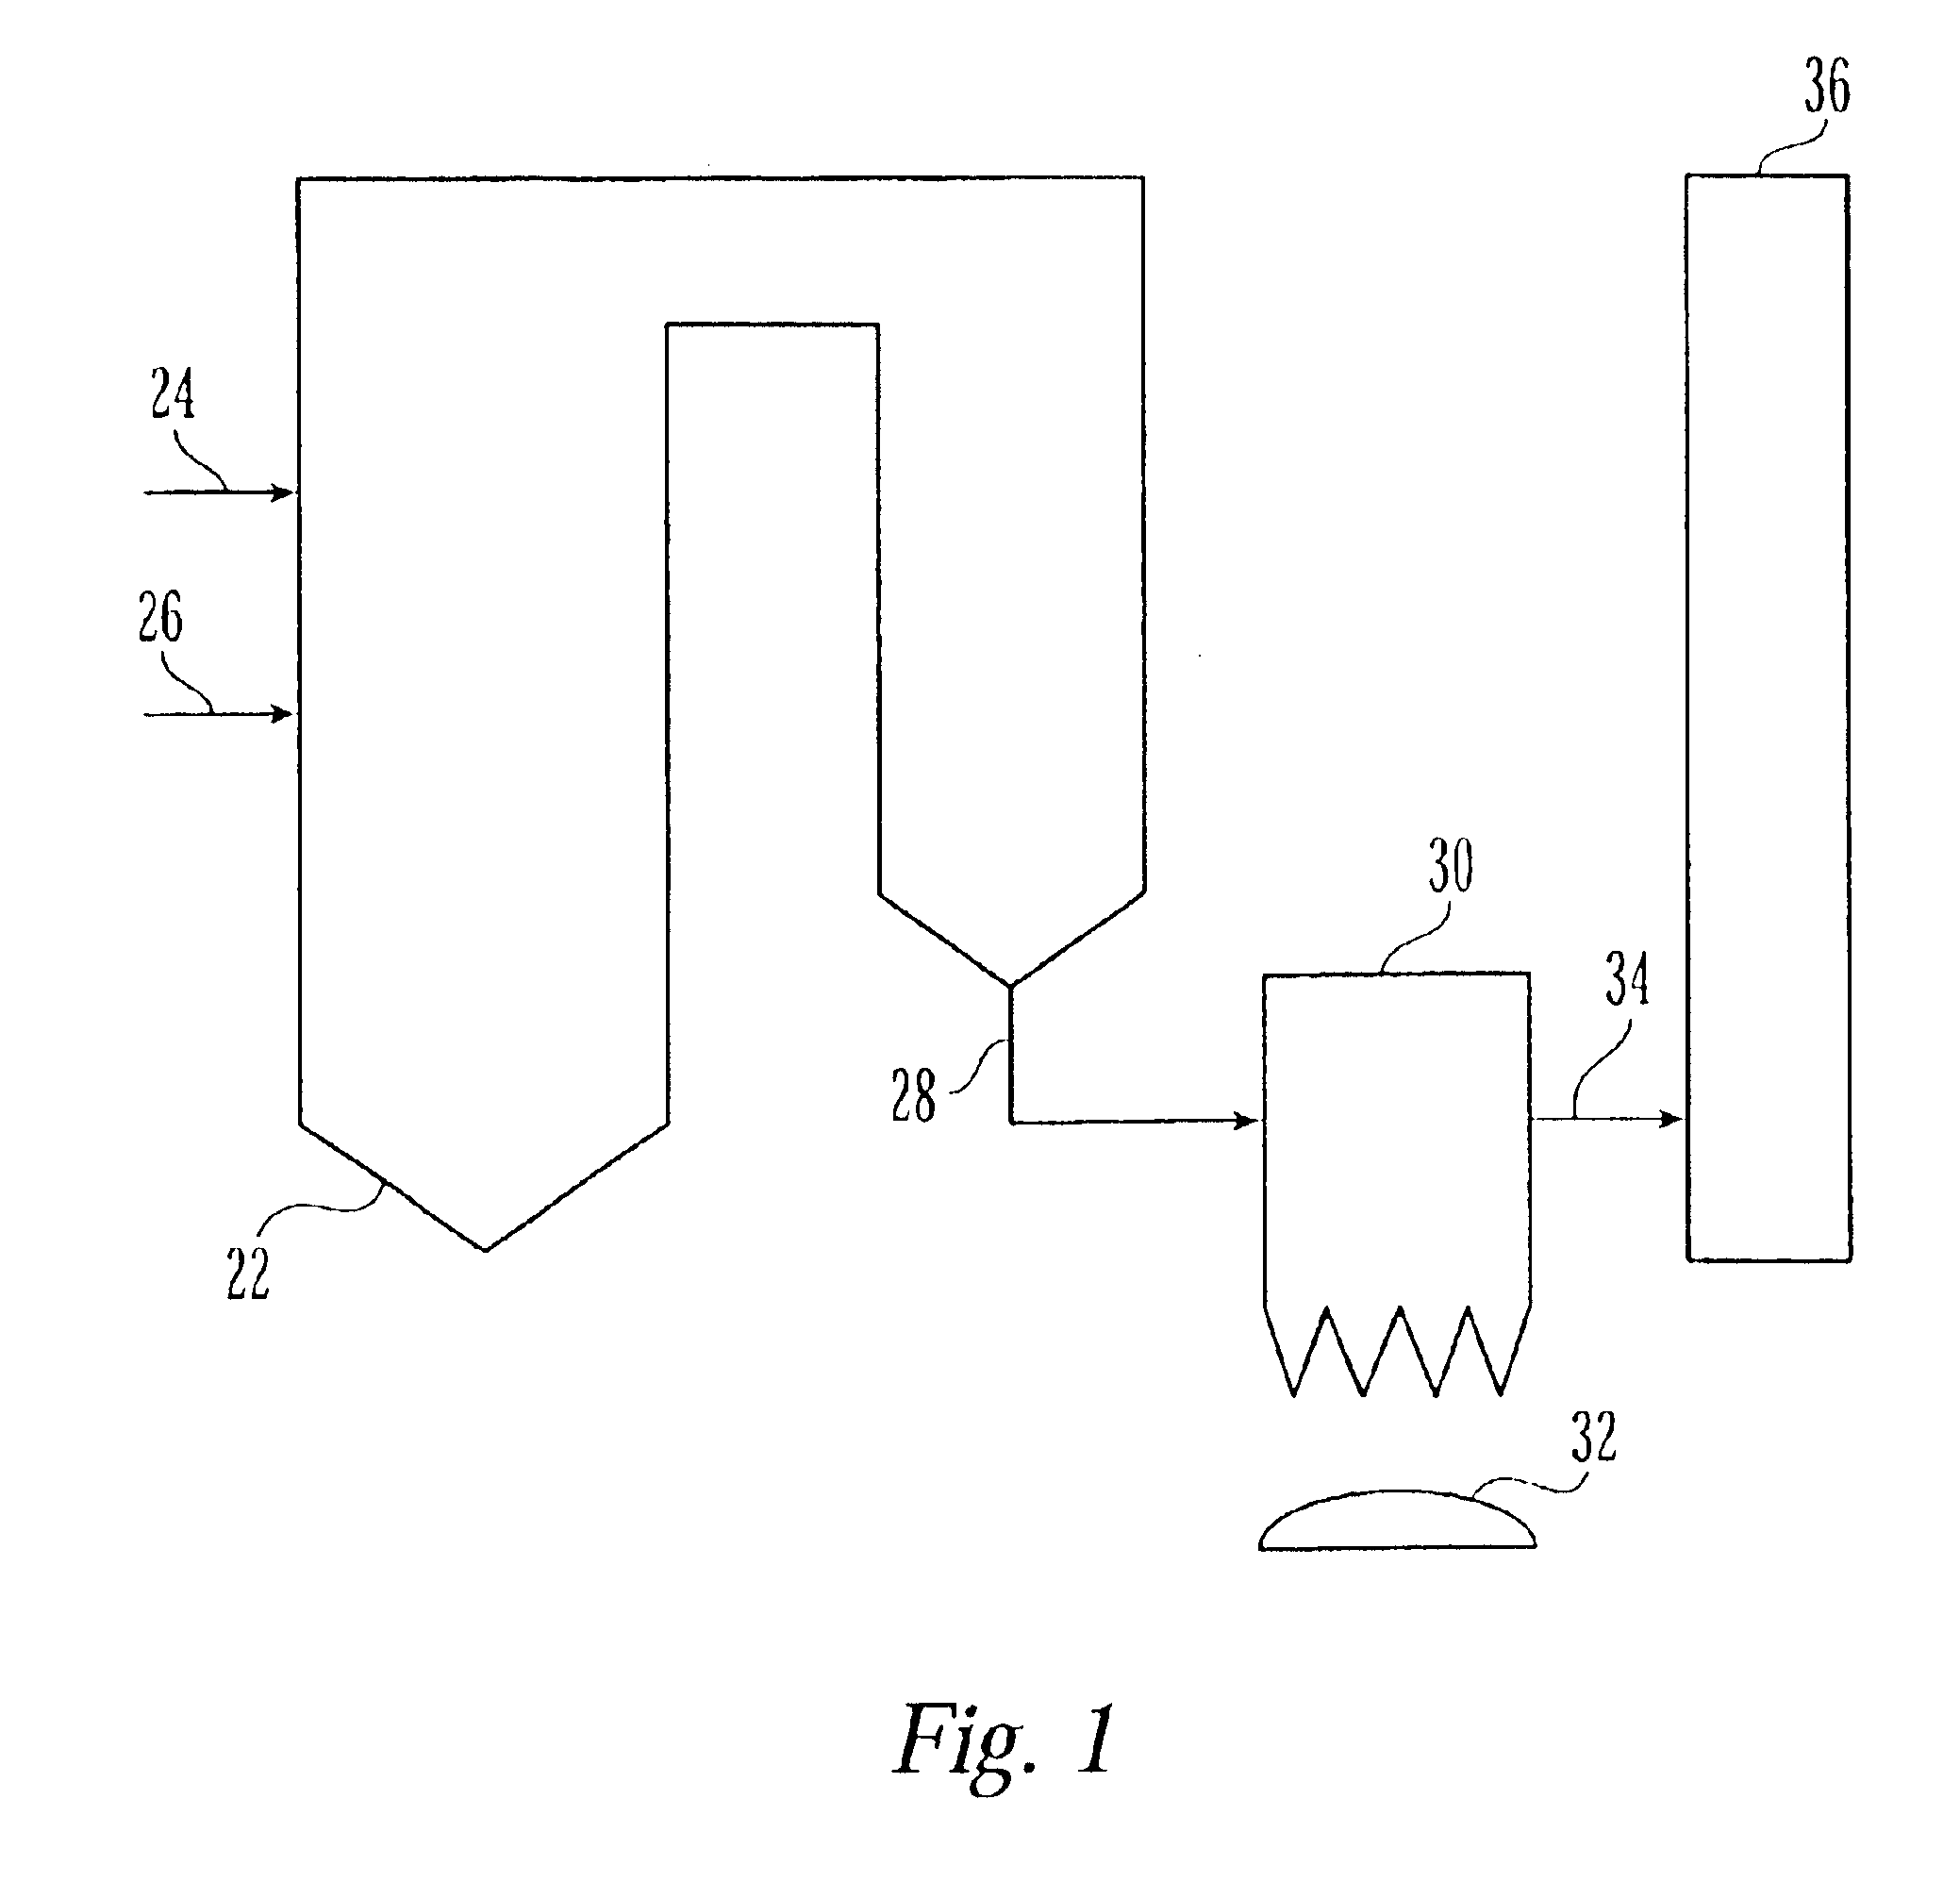 Method and apparatus for removing vapor phase contaminants from a flue gas stream